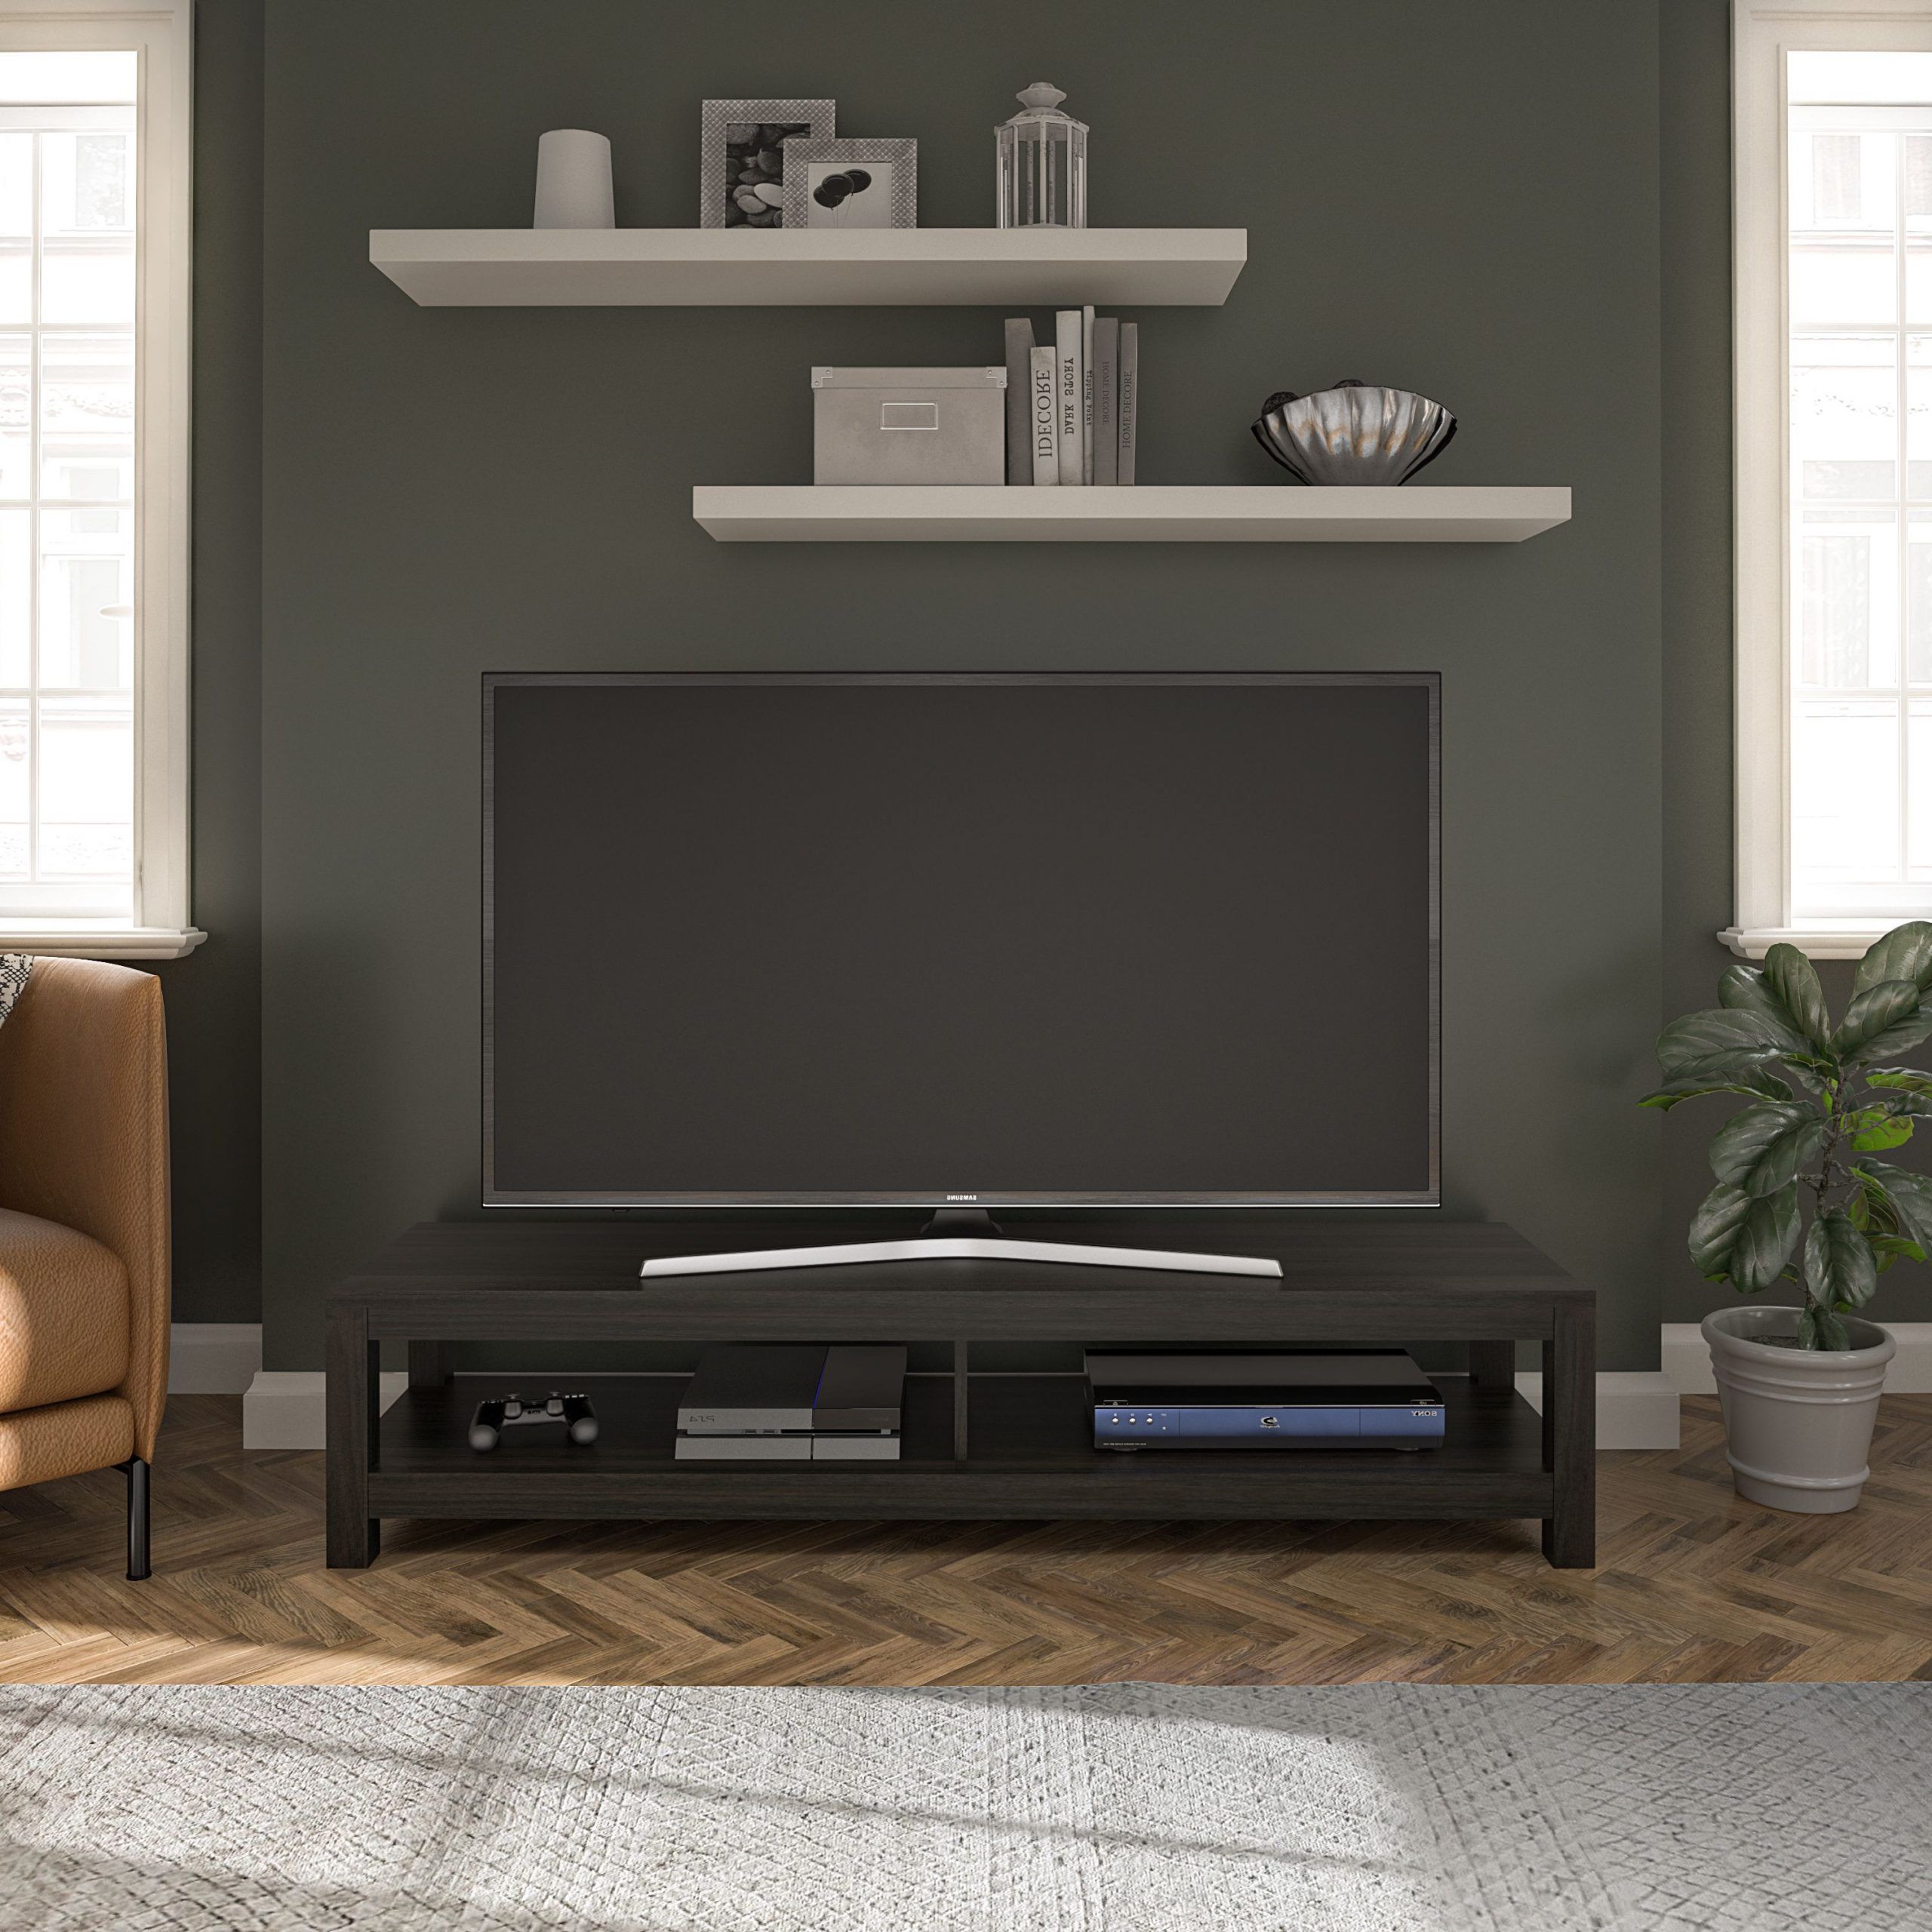 Mainstays Easy Assembly Tv Stand For Tv's Up To 65 In Olinda Tv Stands For Tvs Up To 65" (Gallery 2 of 20)